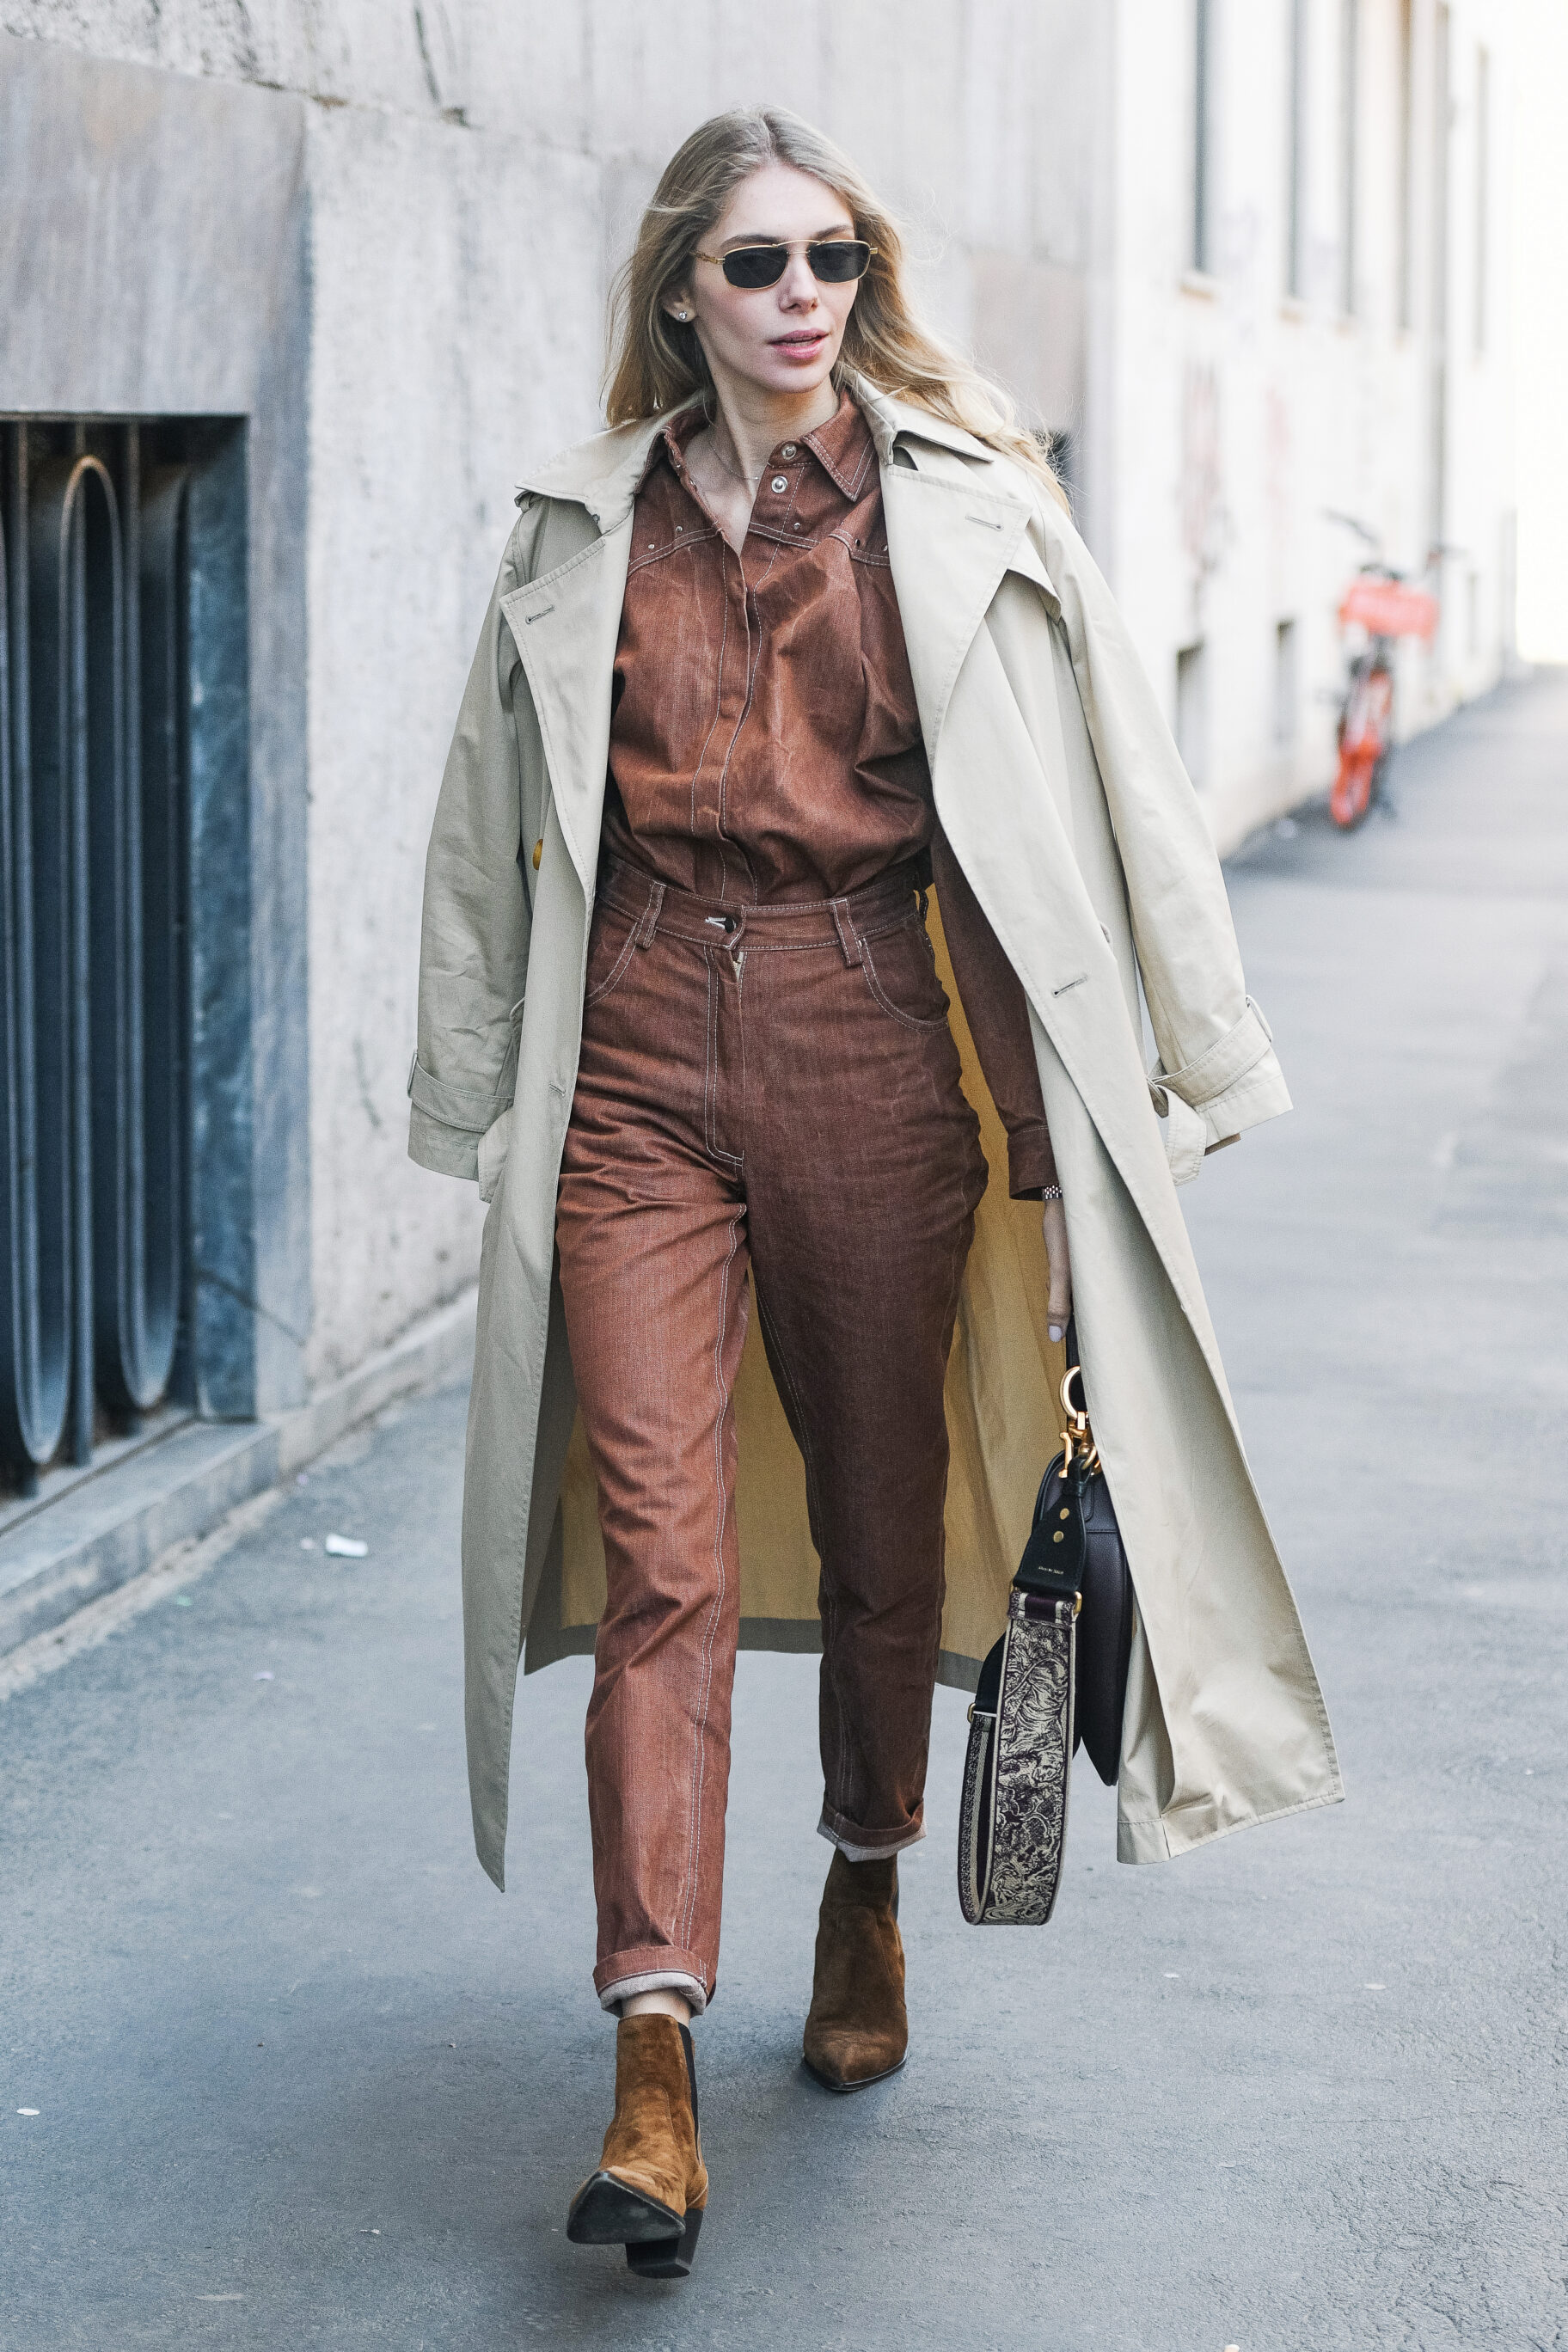 Wearing Trench Coat With Brown Boots